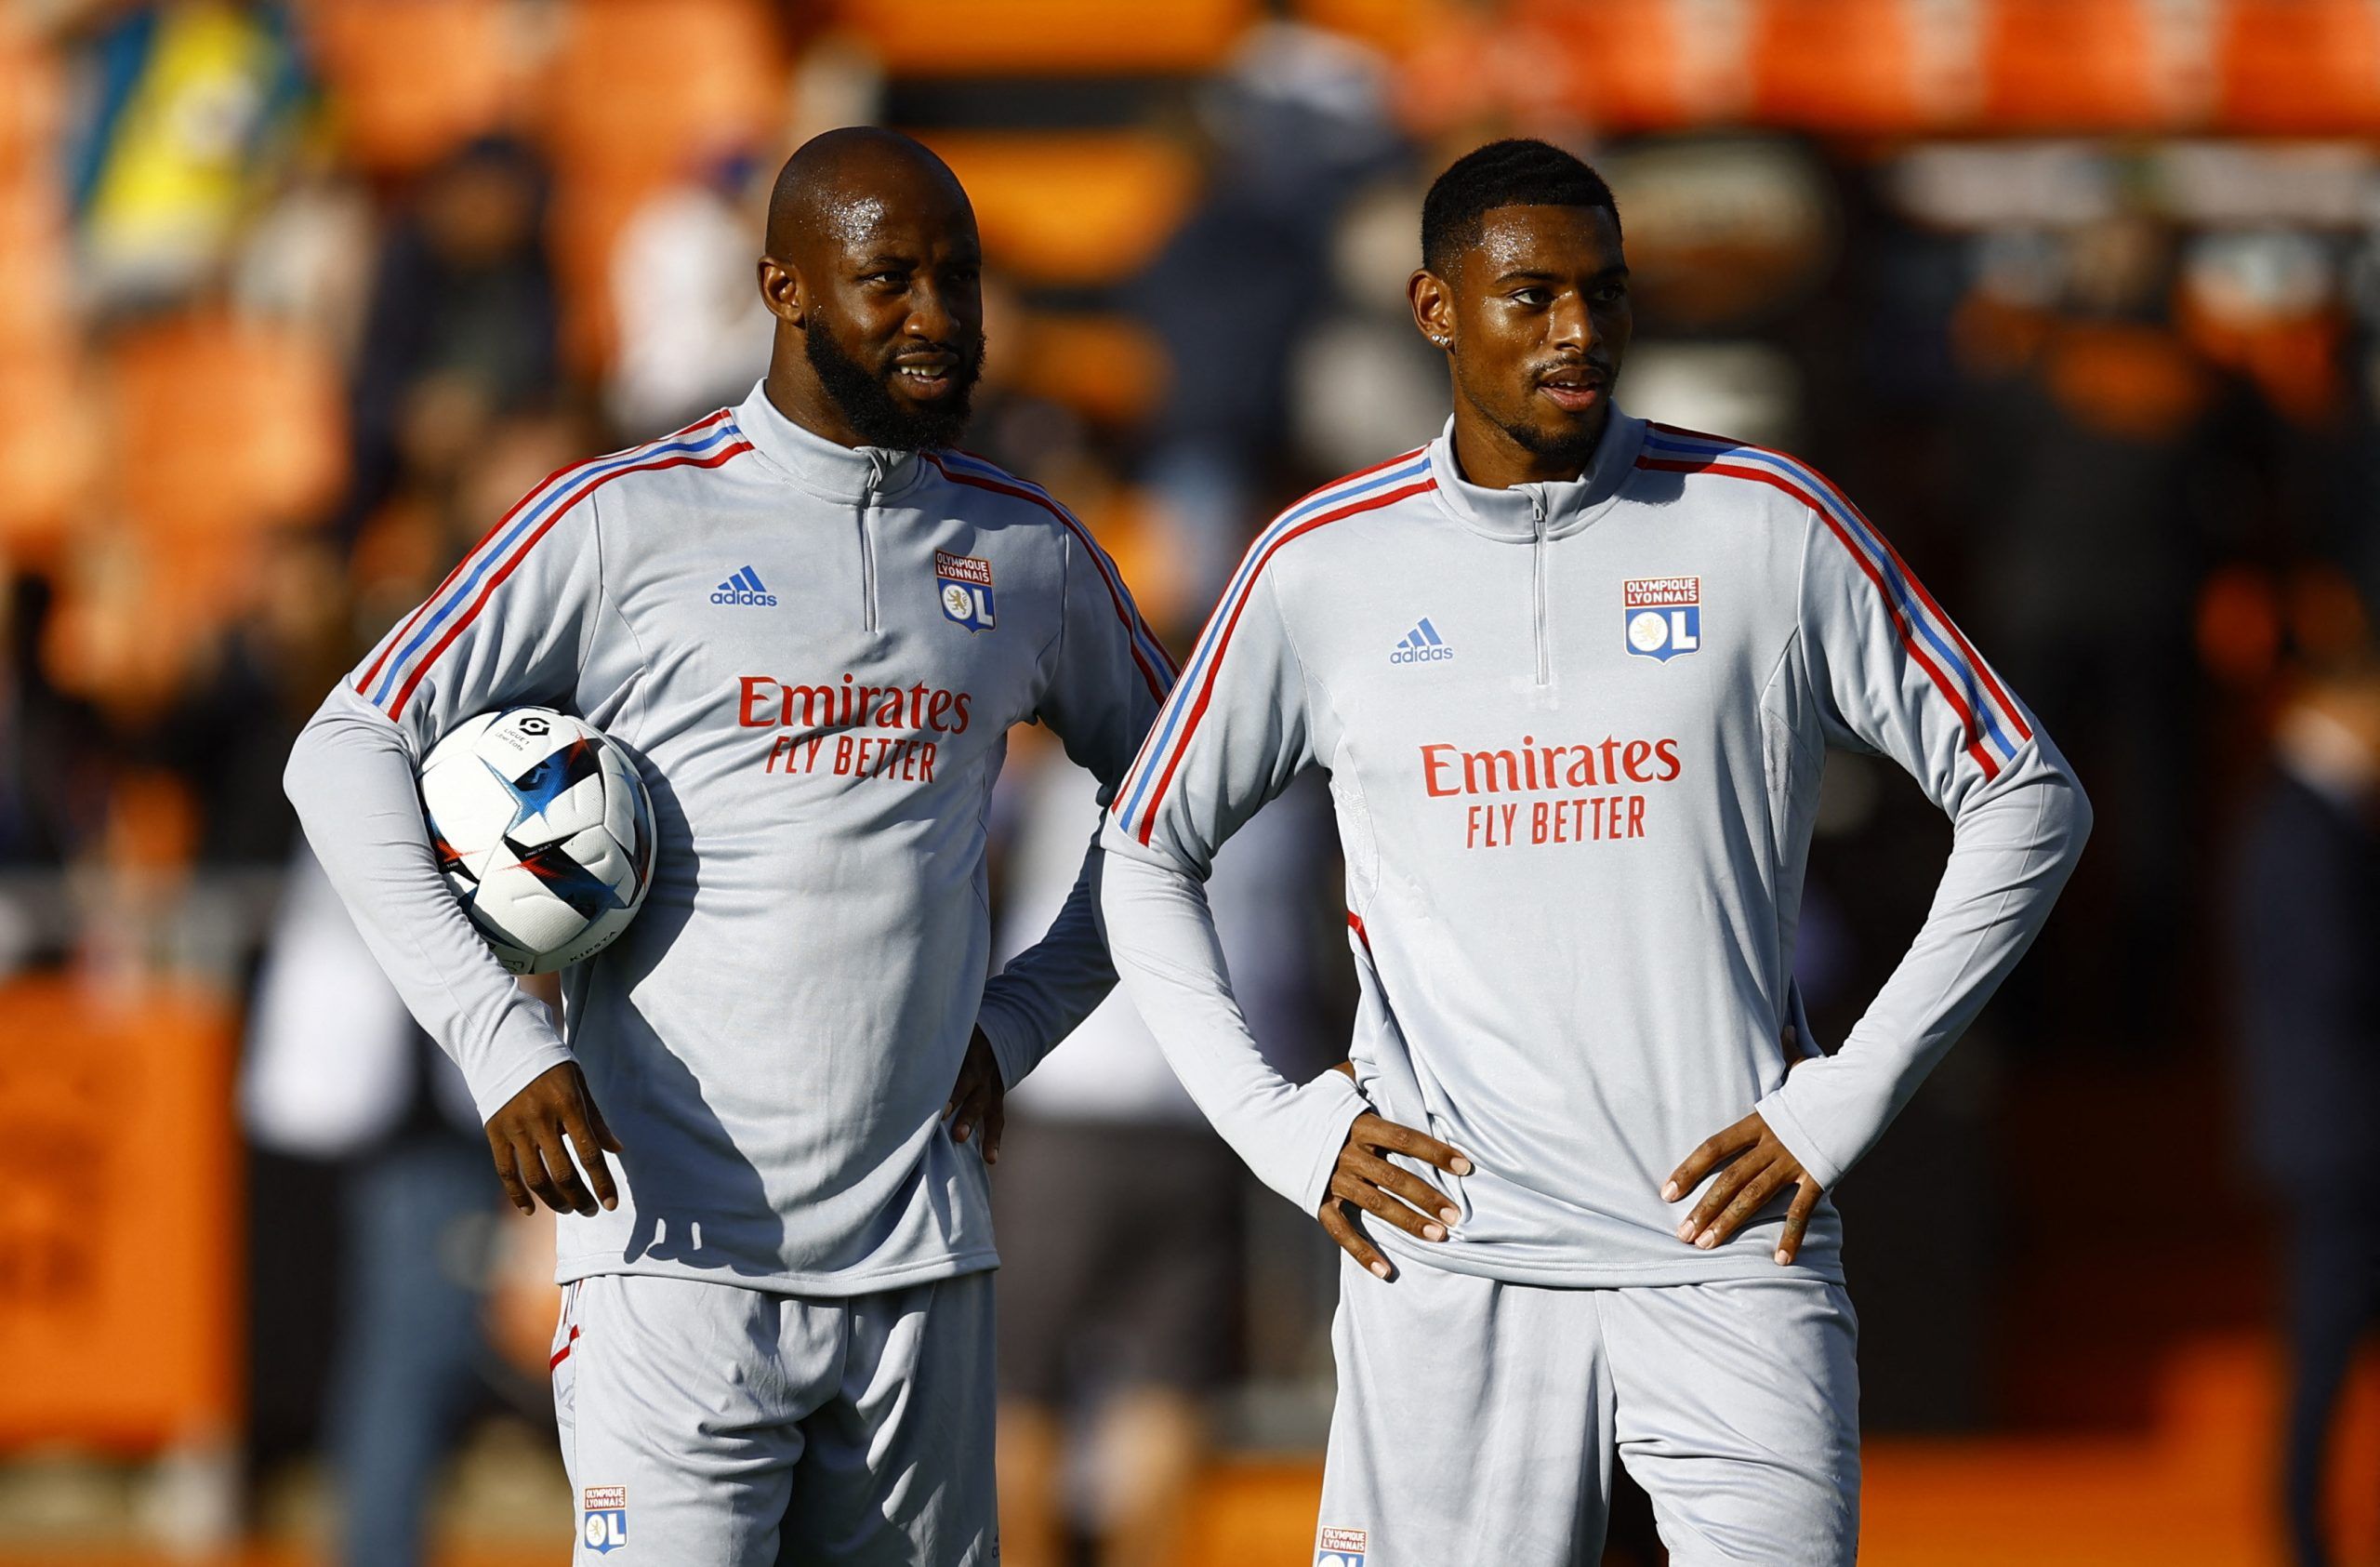 Soccer Football - Ligue 1 - Lorient v Olympique Lyonnais - Stade du Moustoir, Lorient, France - September 7, 2022 Olympique Lyonnais' Moussa Dembele and Jeff Reine-Adelaide during the warm up before the match REUTERS/Stephane Mahe